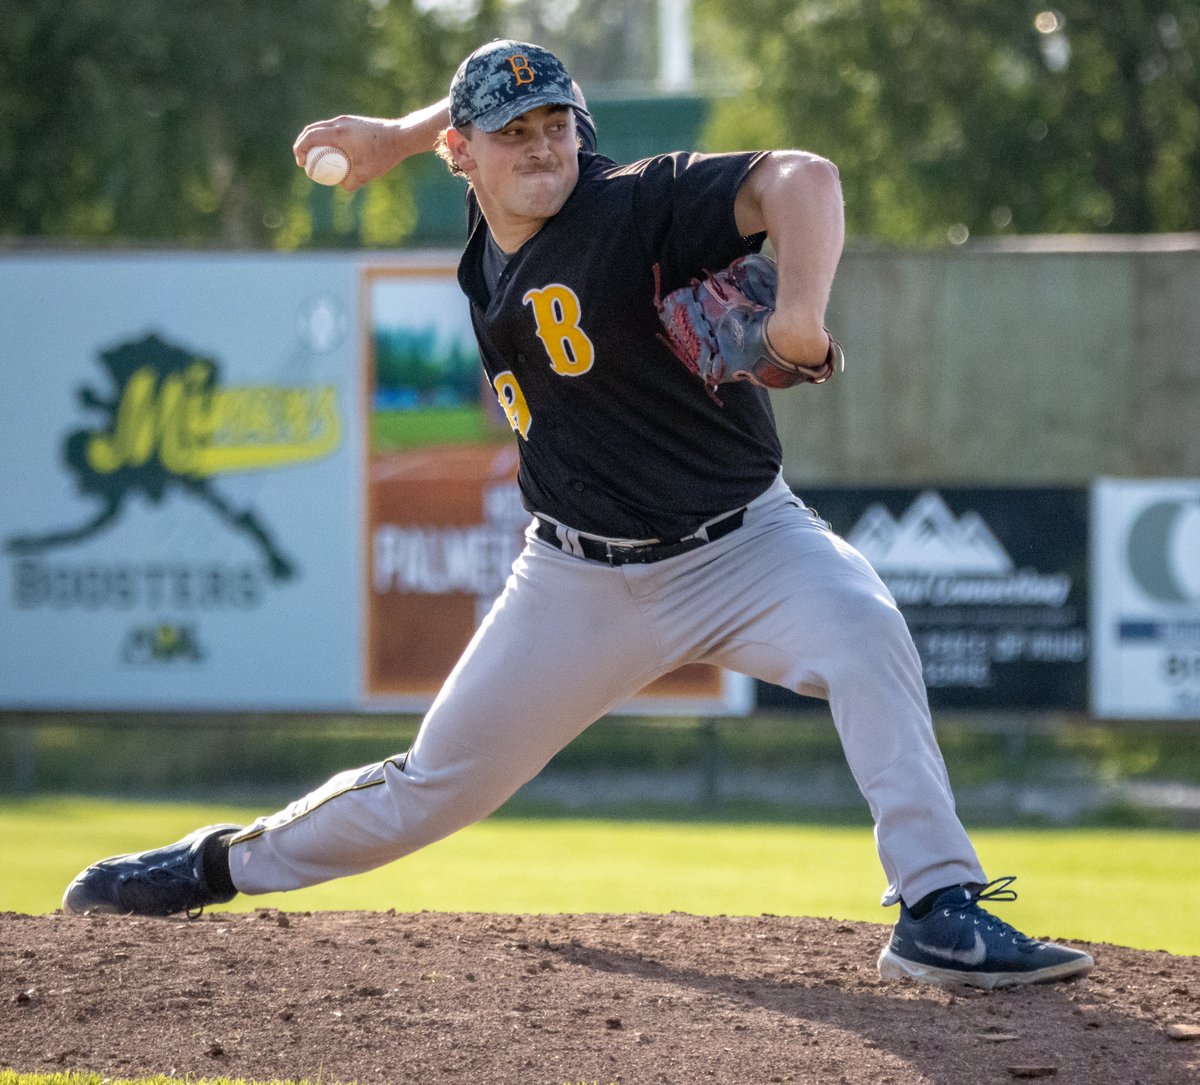 With a fastball and changeup that averaged over 17' of horizontal break during the fall, @ZagBaseball RHP @williskempy 'might be the nastiest sidewinder on the West Coast.' Zags Fall Report: d1ba.se/3JN3Yar